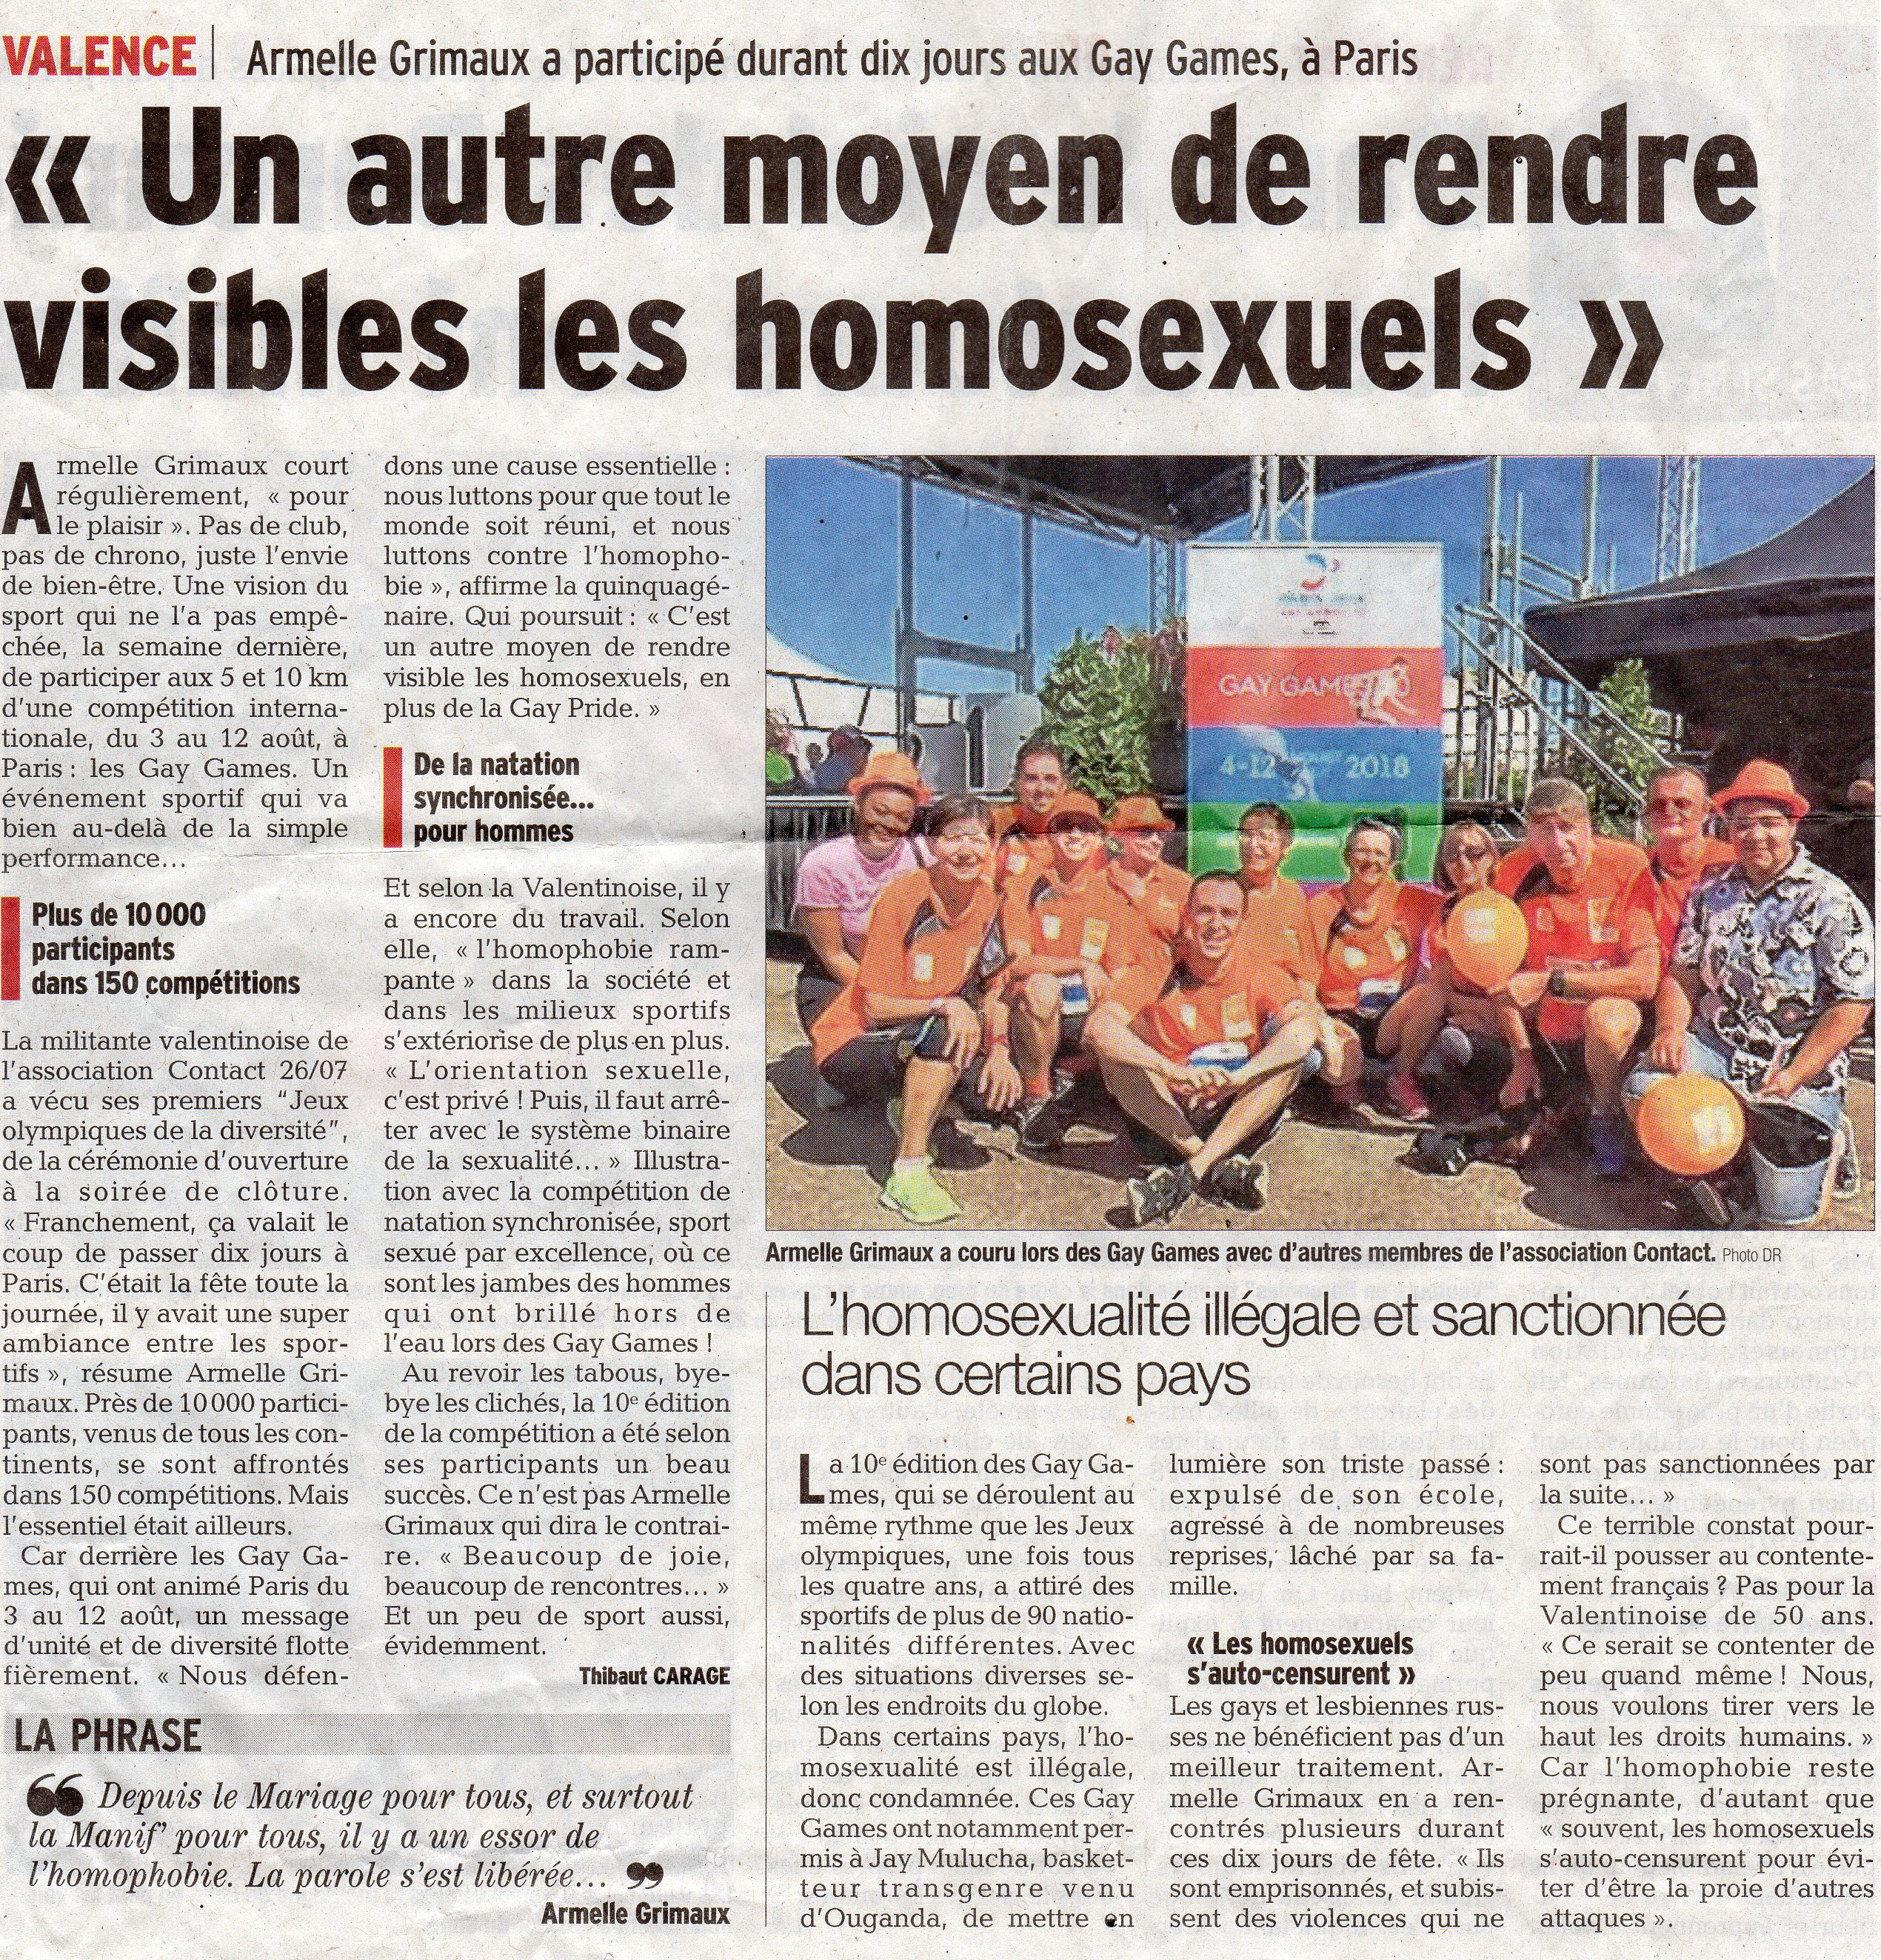 180817_dl_article_gaygames.jpg